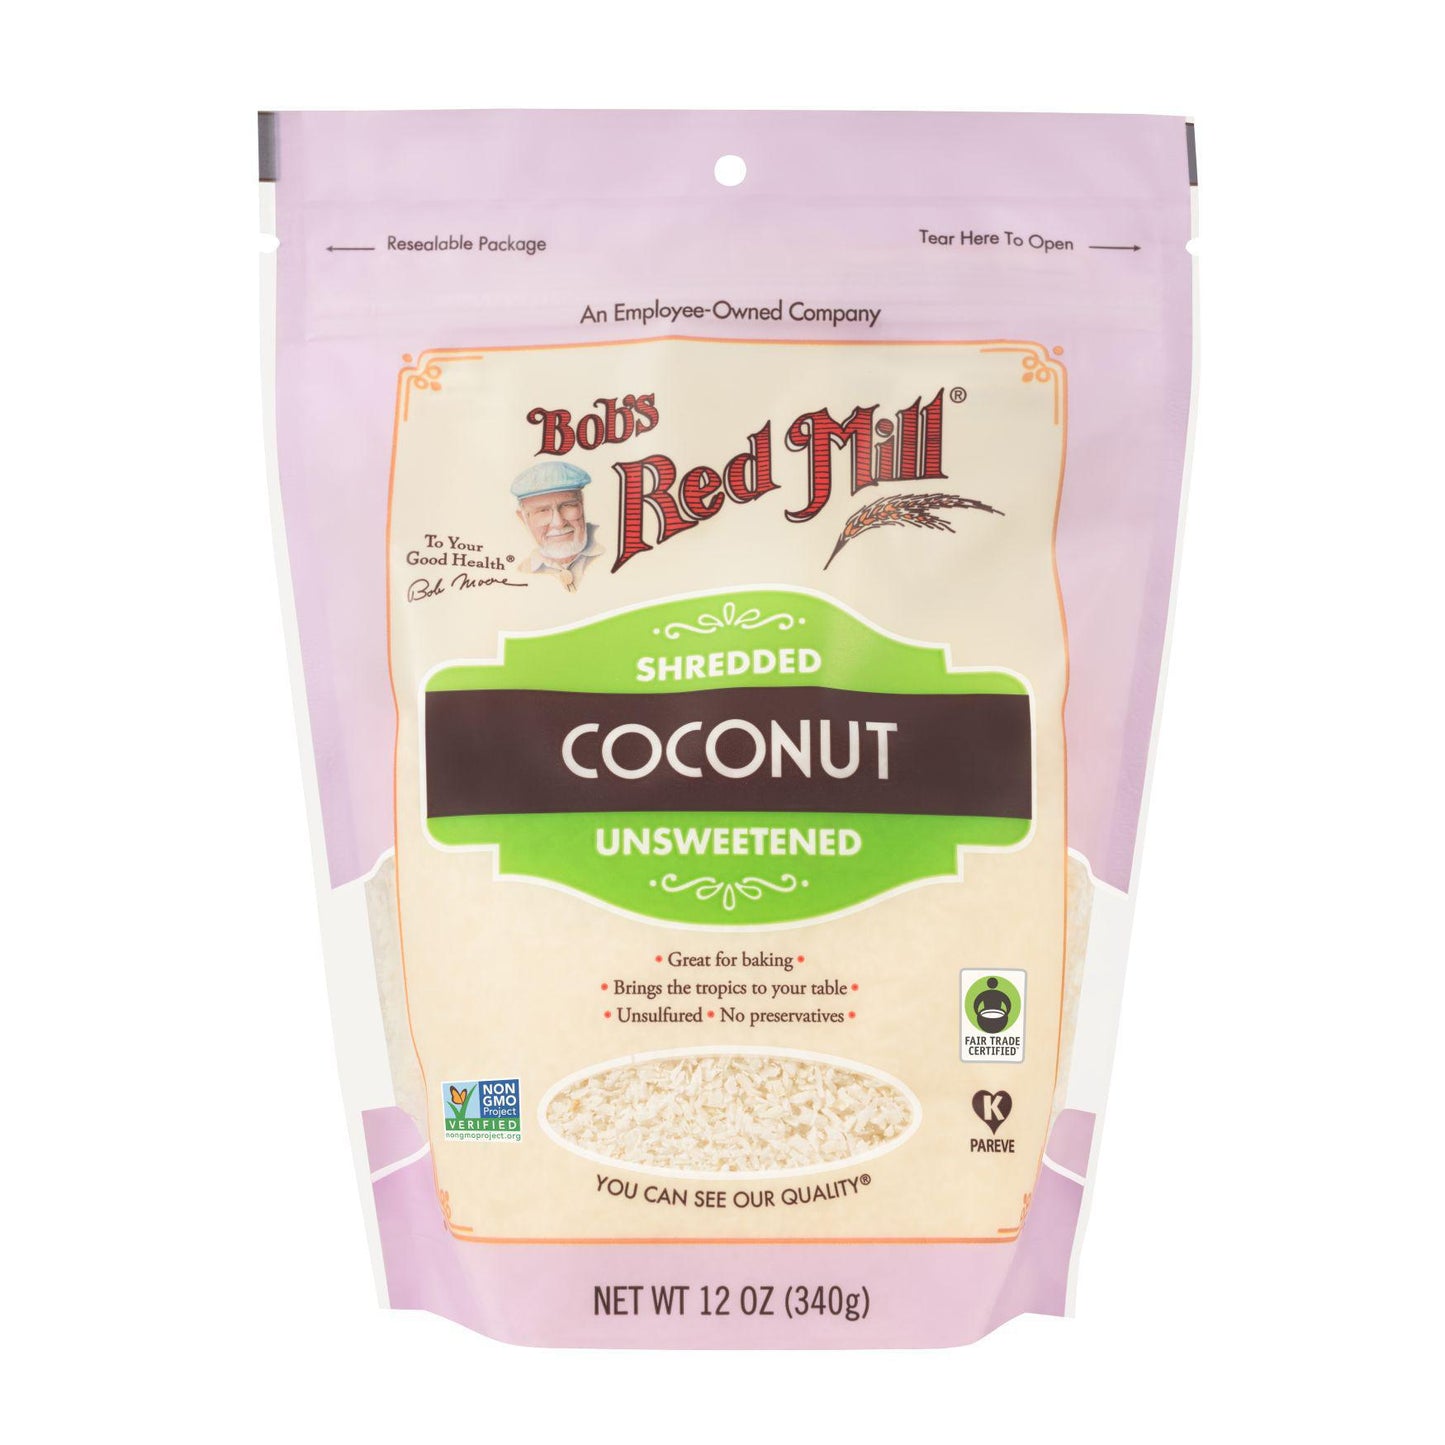 Bob's Red Mill - Unsweetened Shredded Coconut (12OZ)